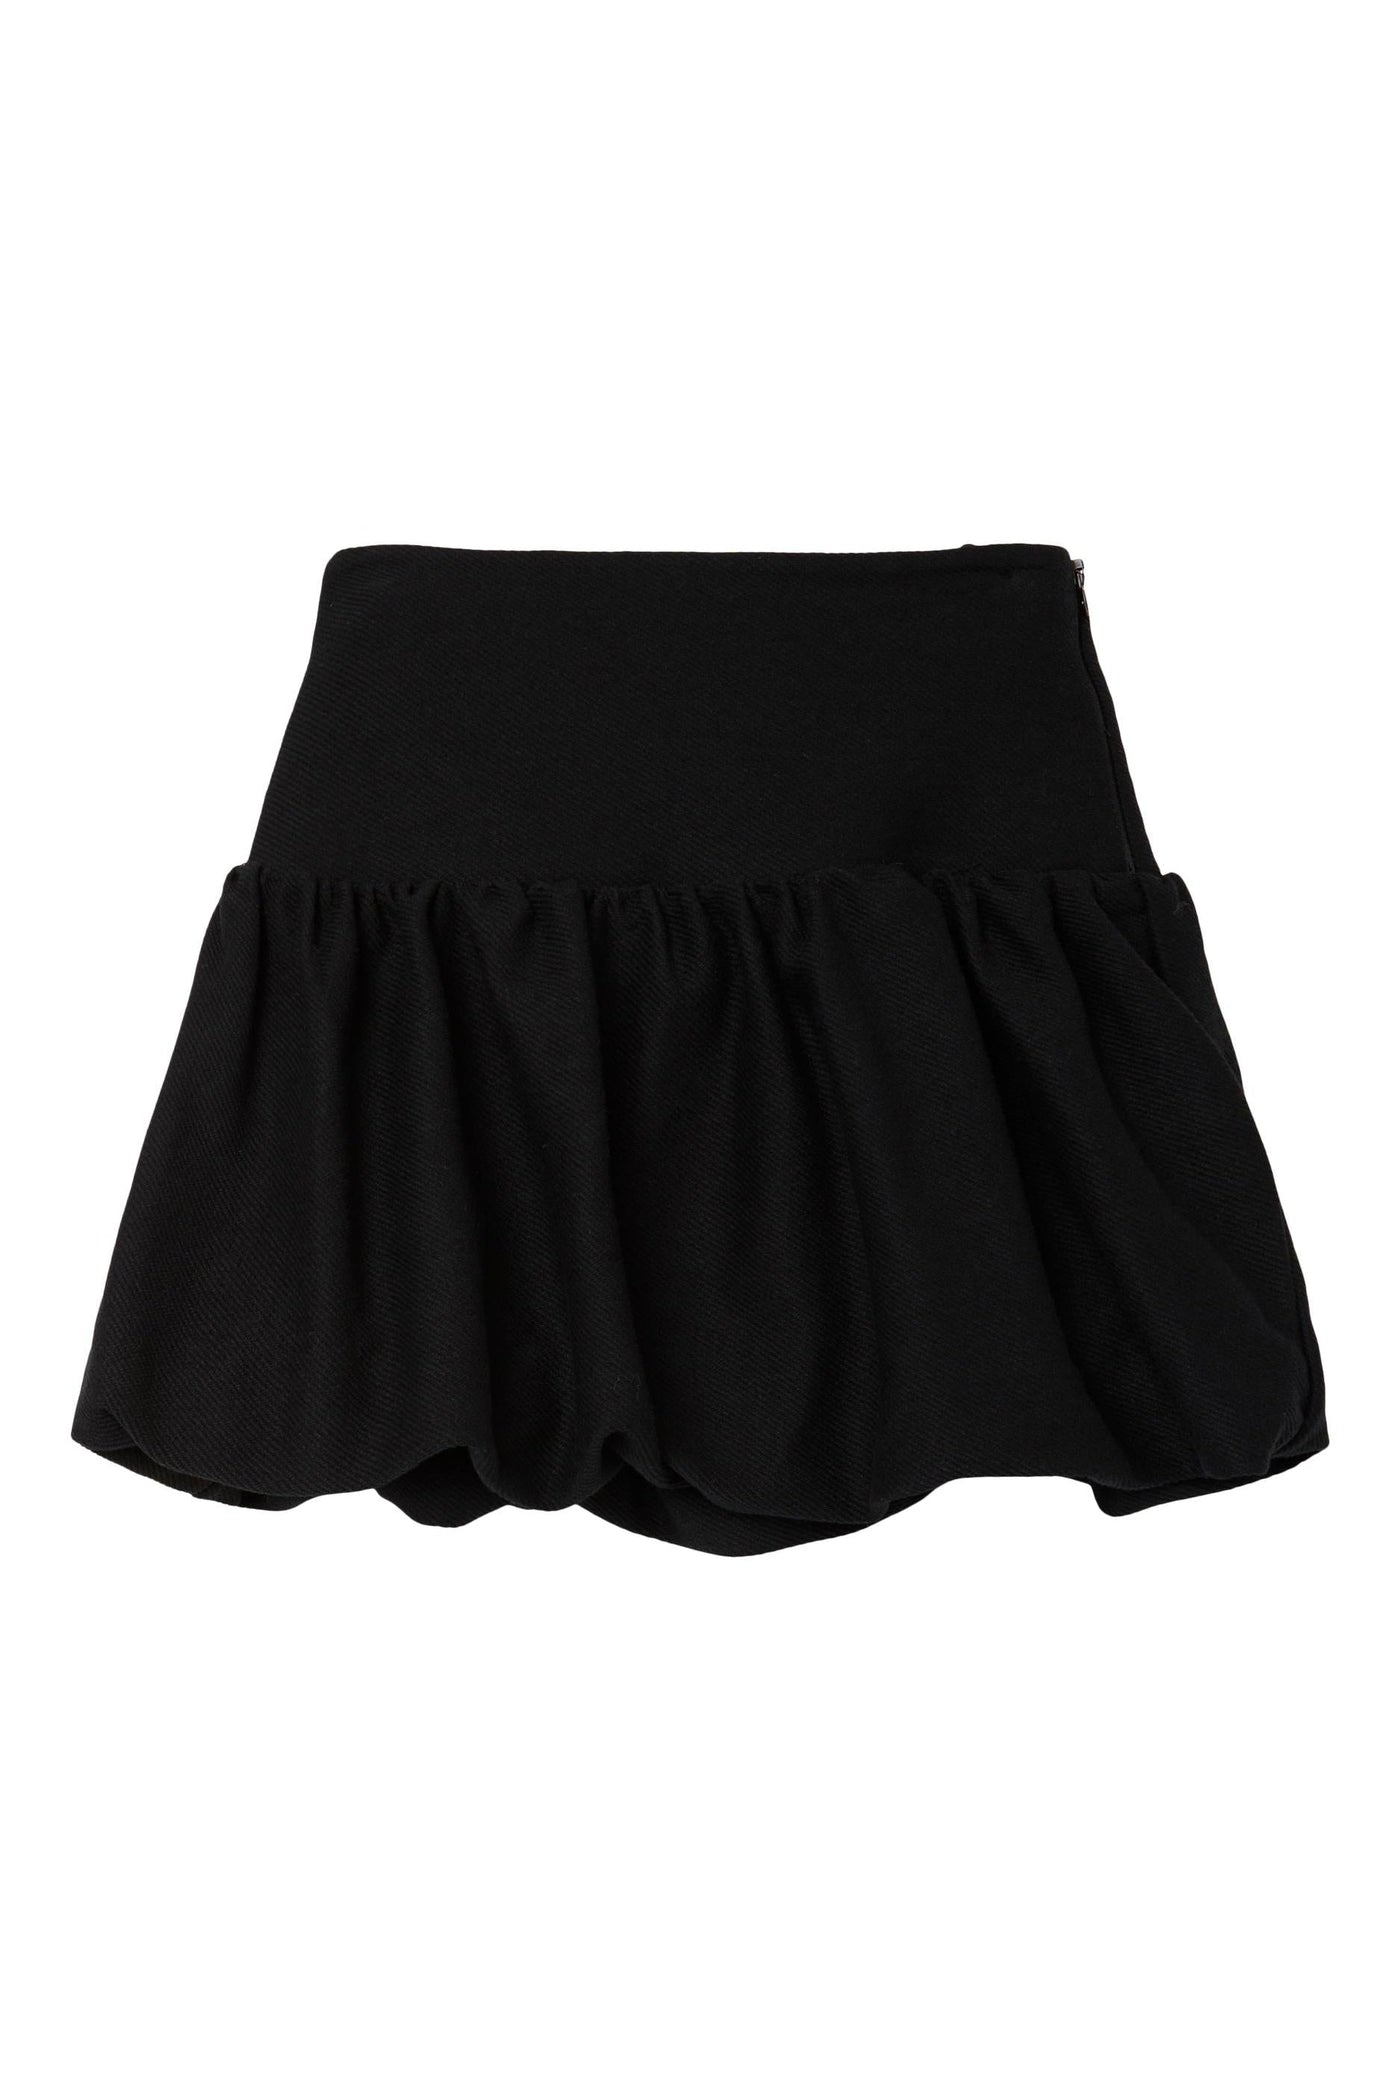 Name It NKFRELINA Skirt-Kids-Ohh! By Gum - Shop Sustainable